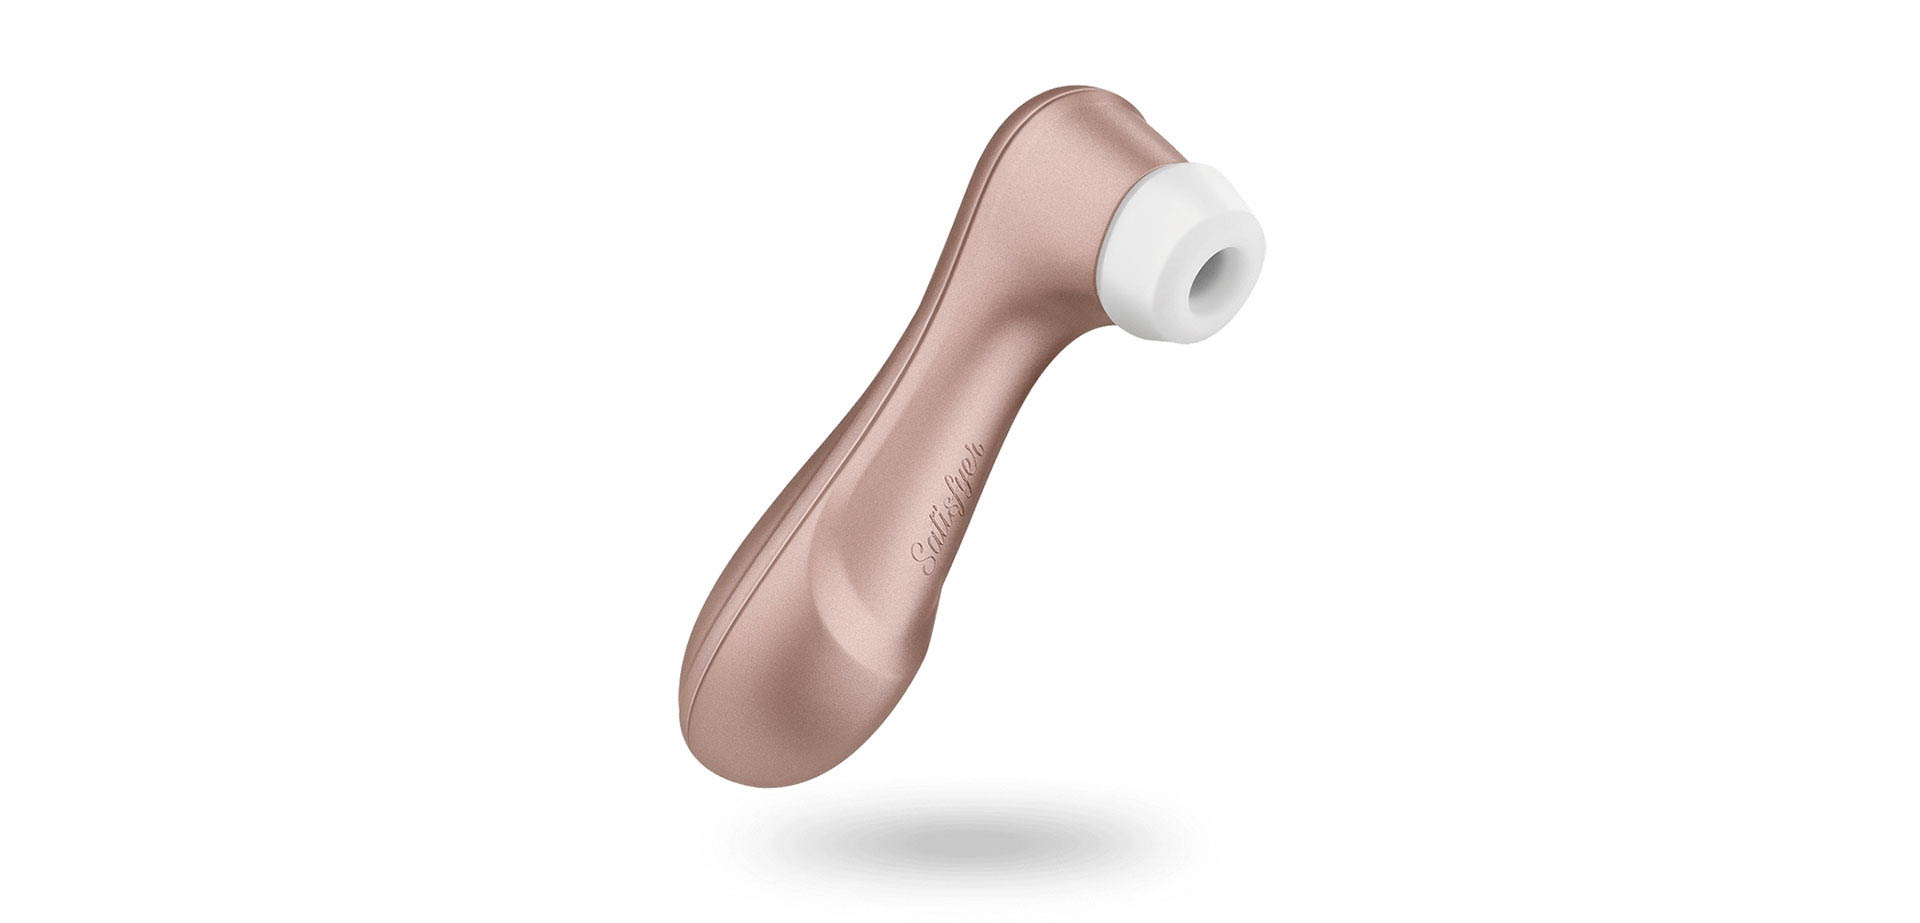 Suction Vibrator for beginners.